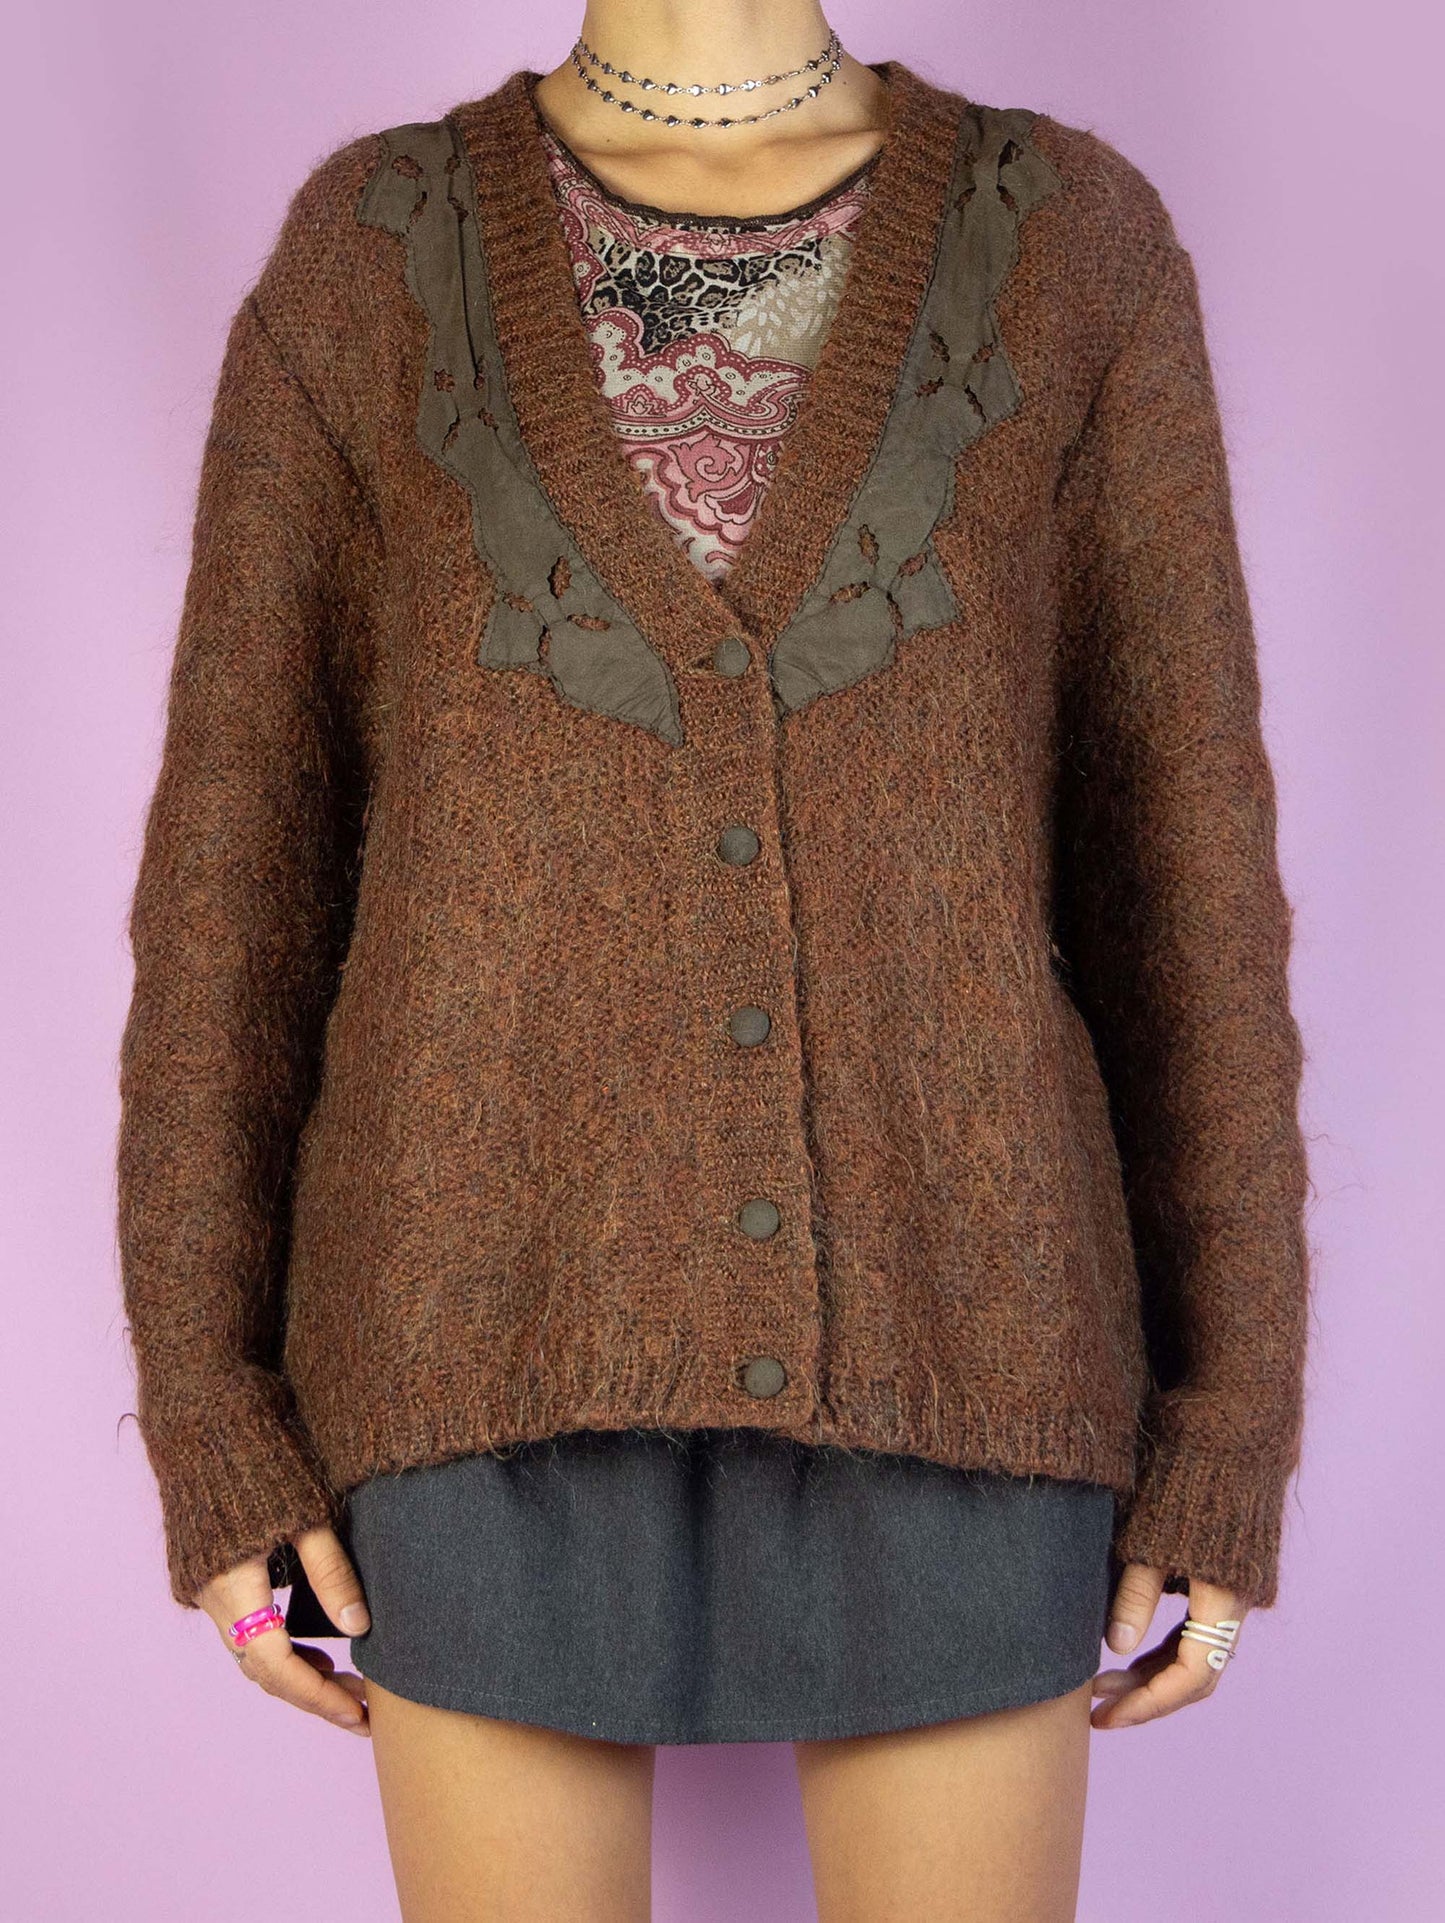 The Vintage 90s Brown Knit Cardigan is a winter V-neck cardigan sweater with buttons.